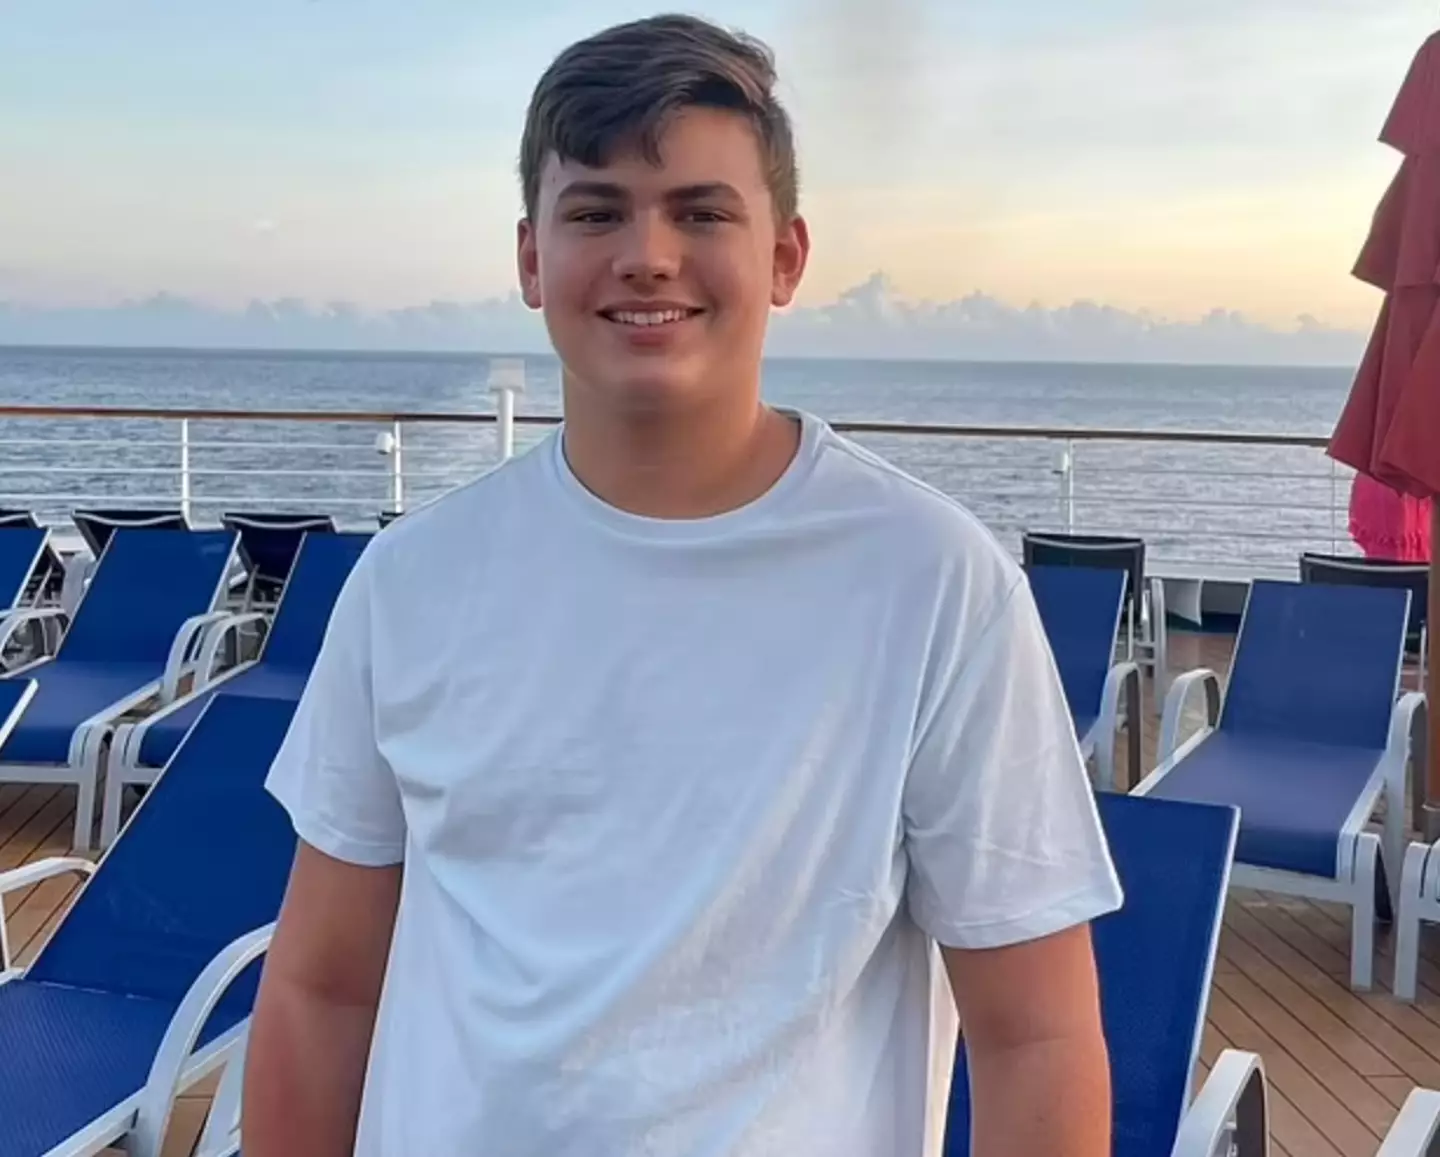 An autistic teenager was able to return safely to the US after a cruise ship changed its route and collected him.